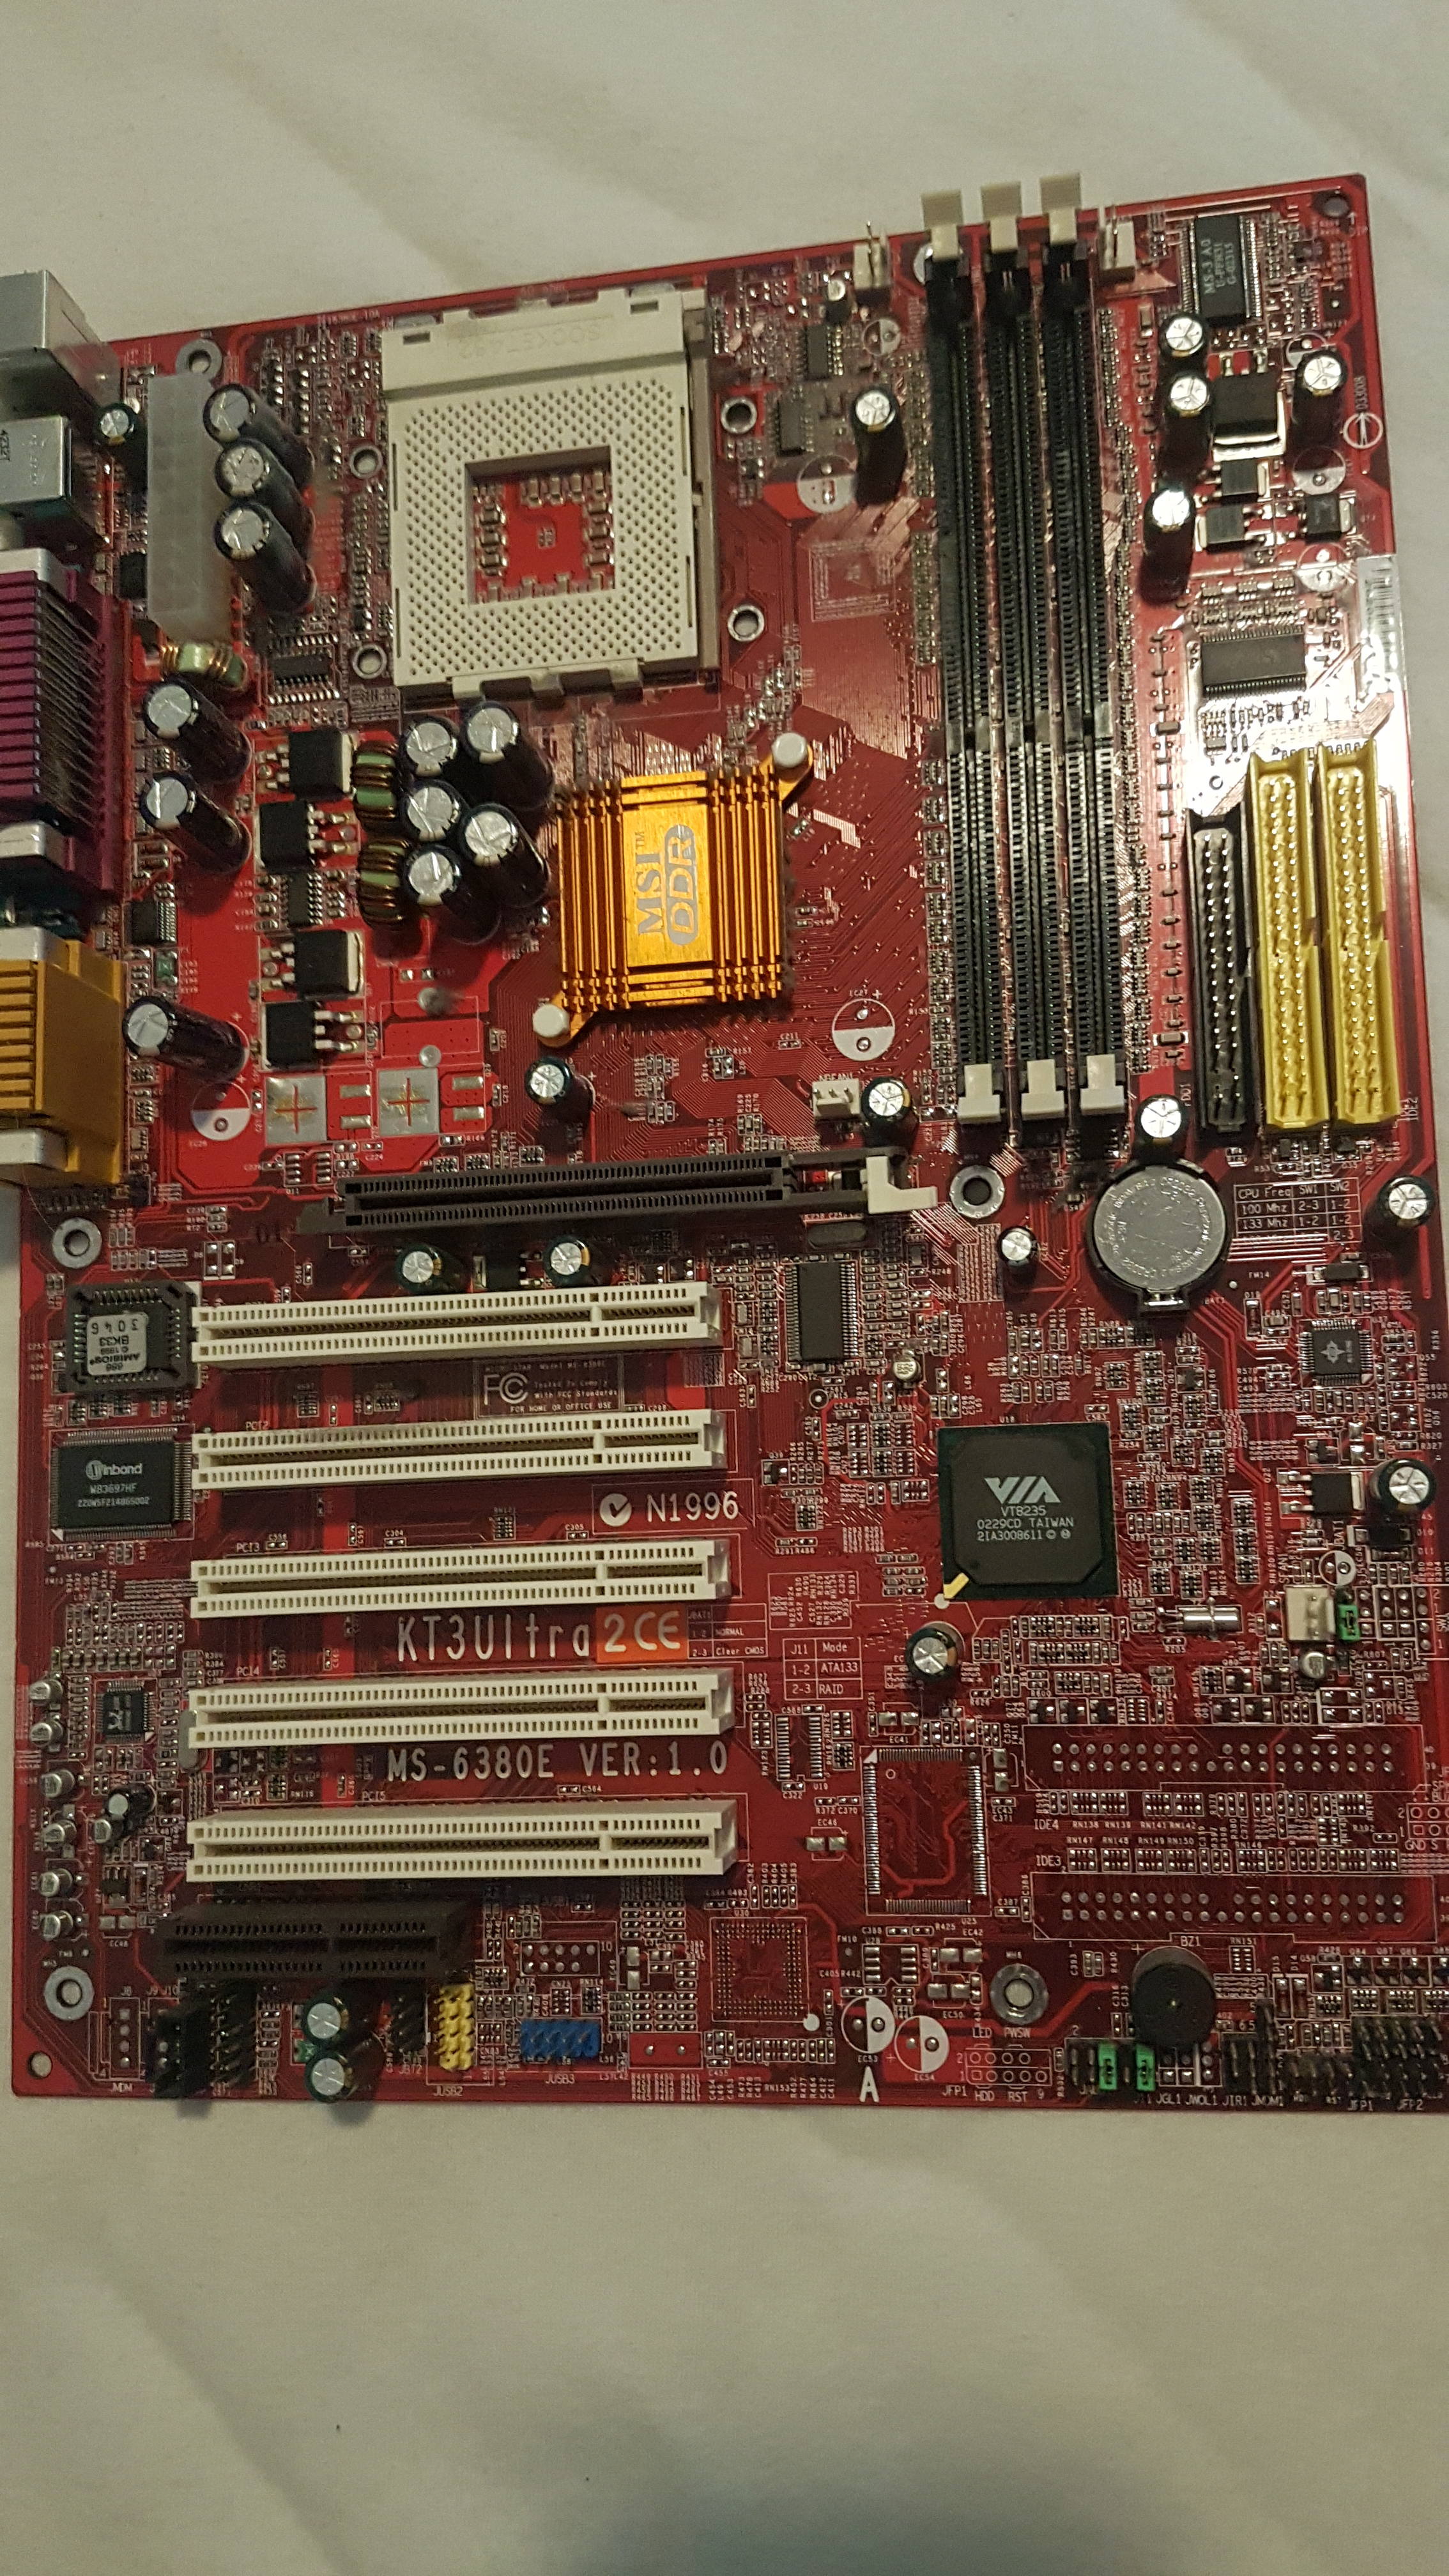 What motherboard is this? - Laptops and Pre-Built Systems - Linus Tech Tips